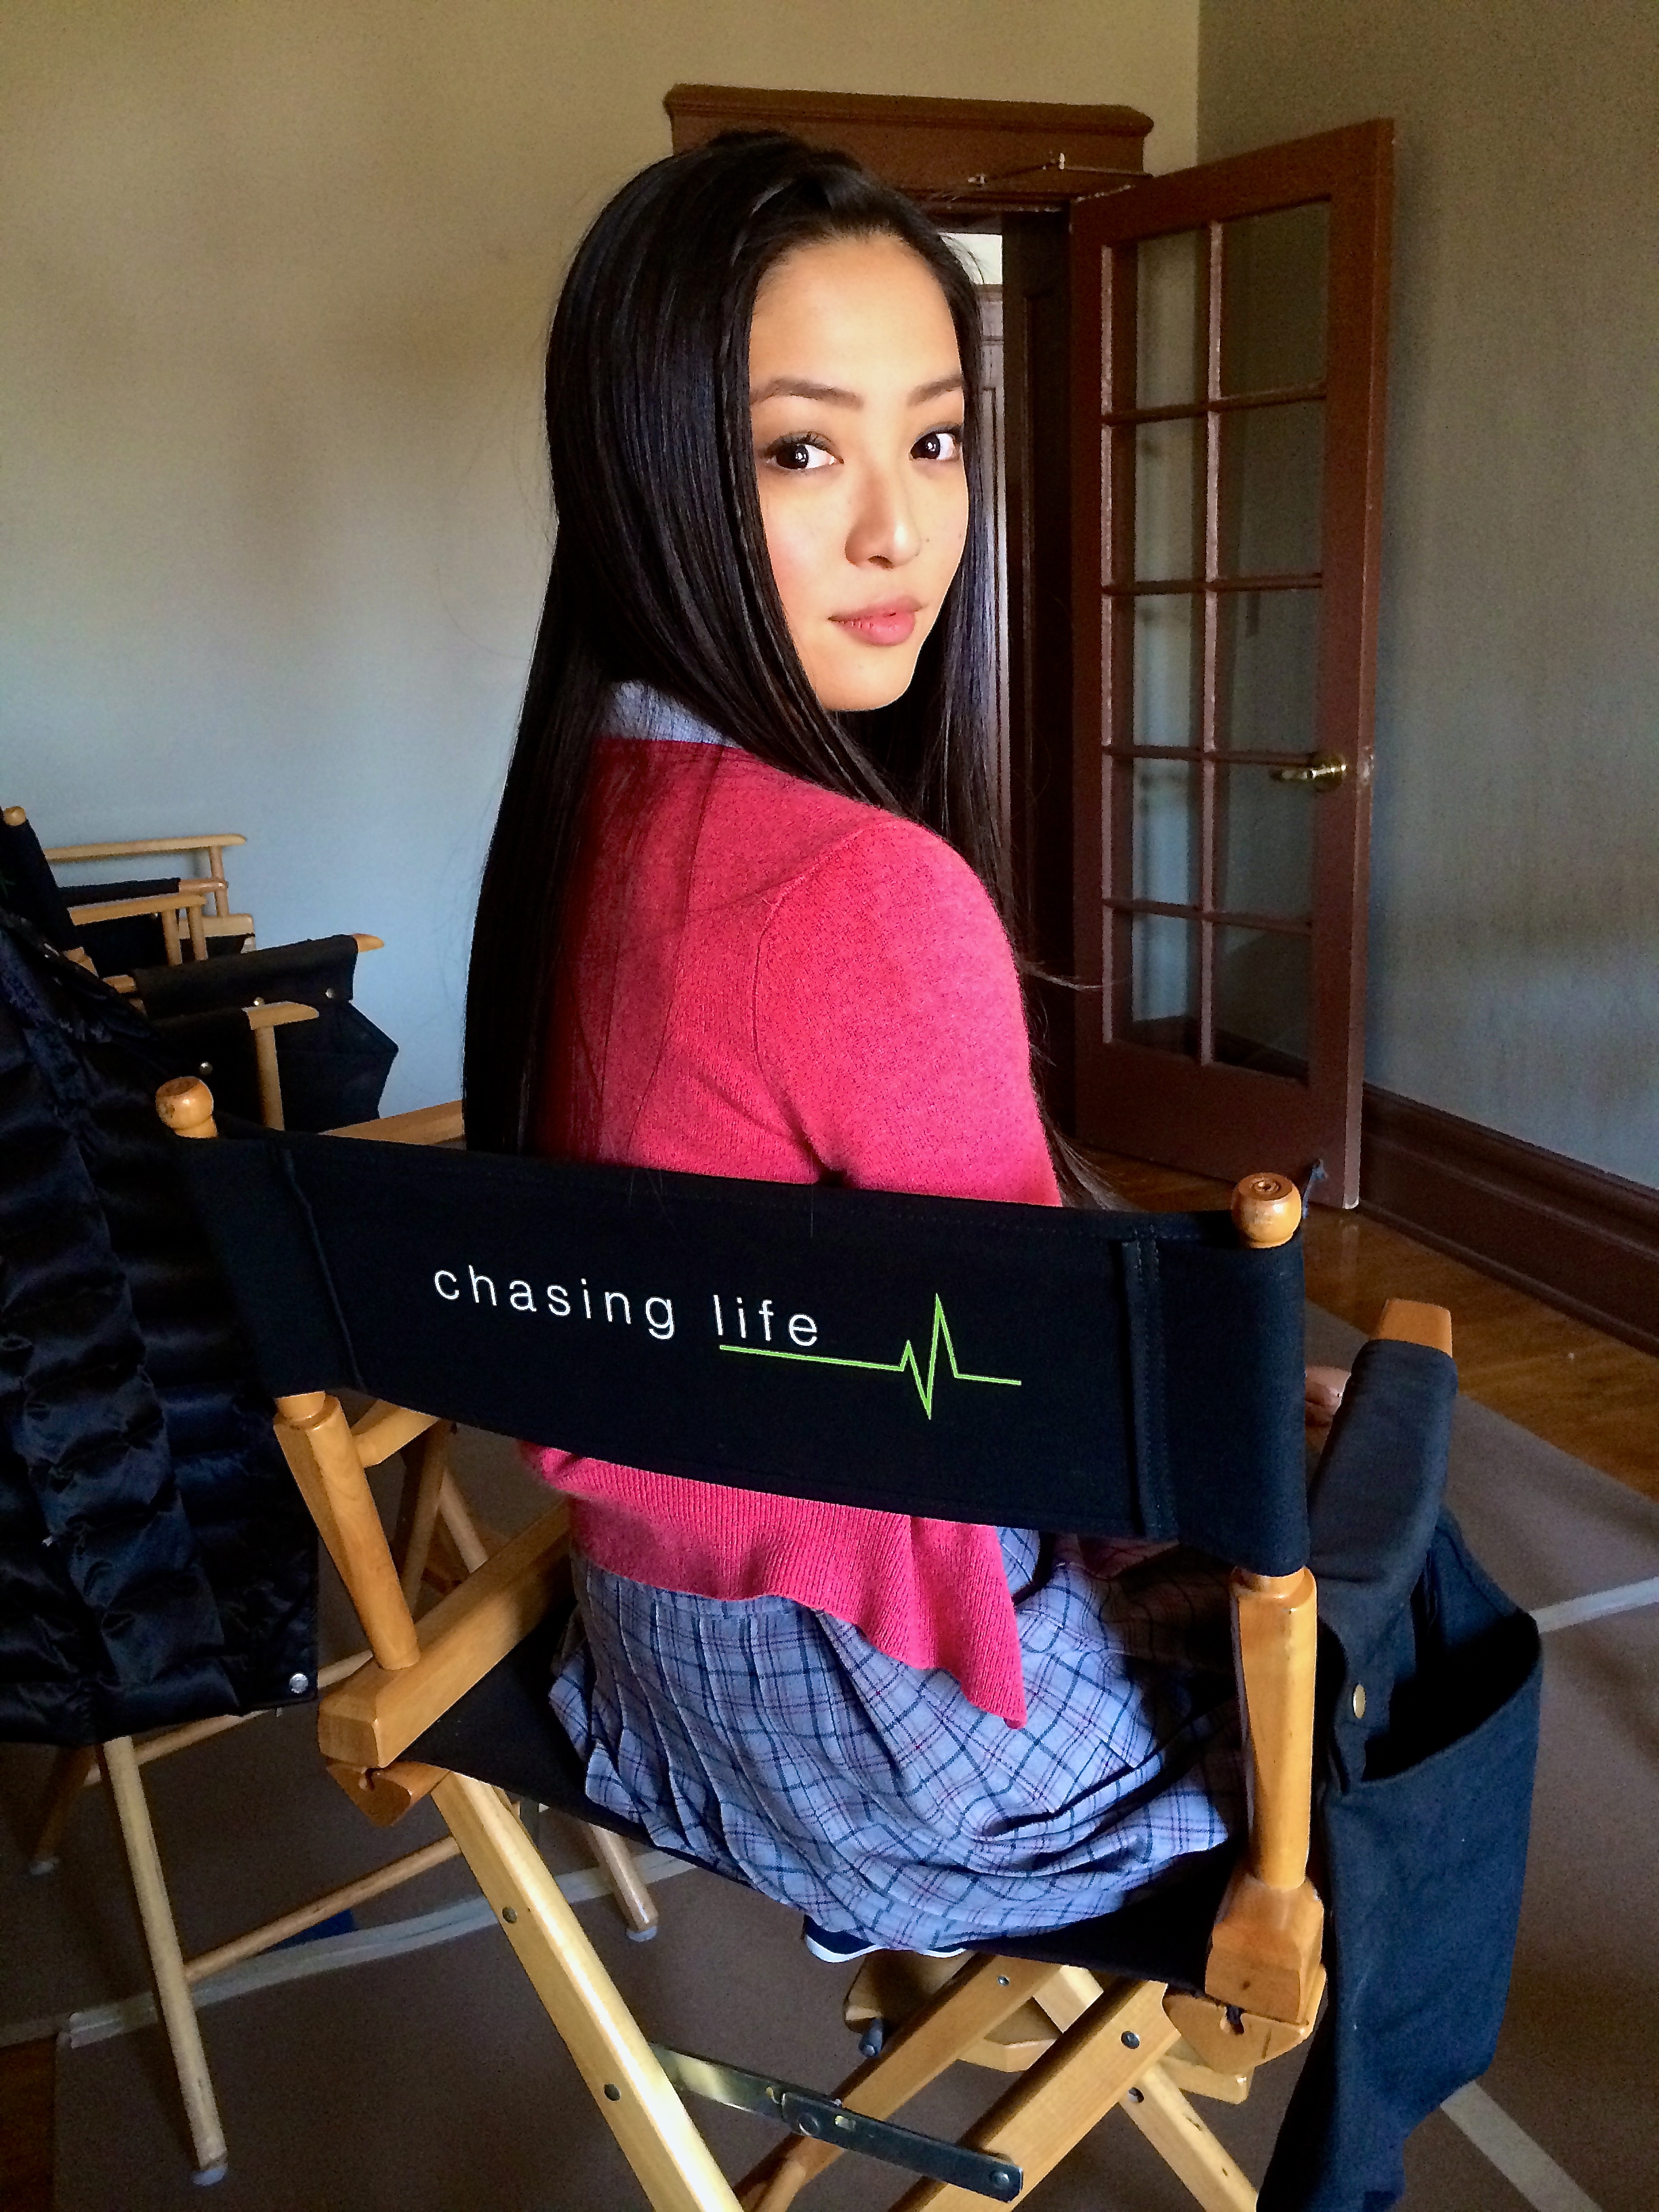 On Set of Chasing Life as Shelby